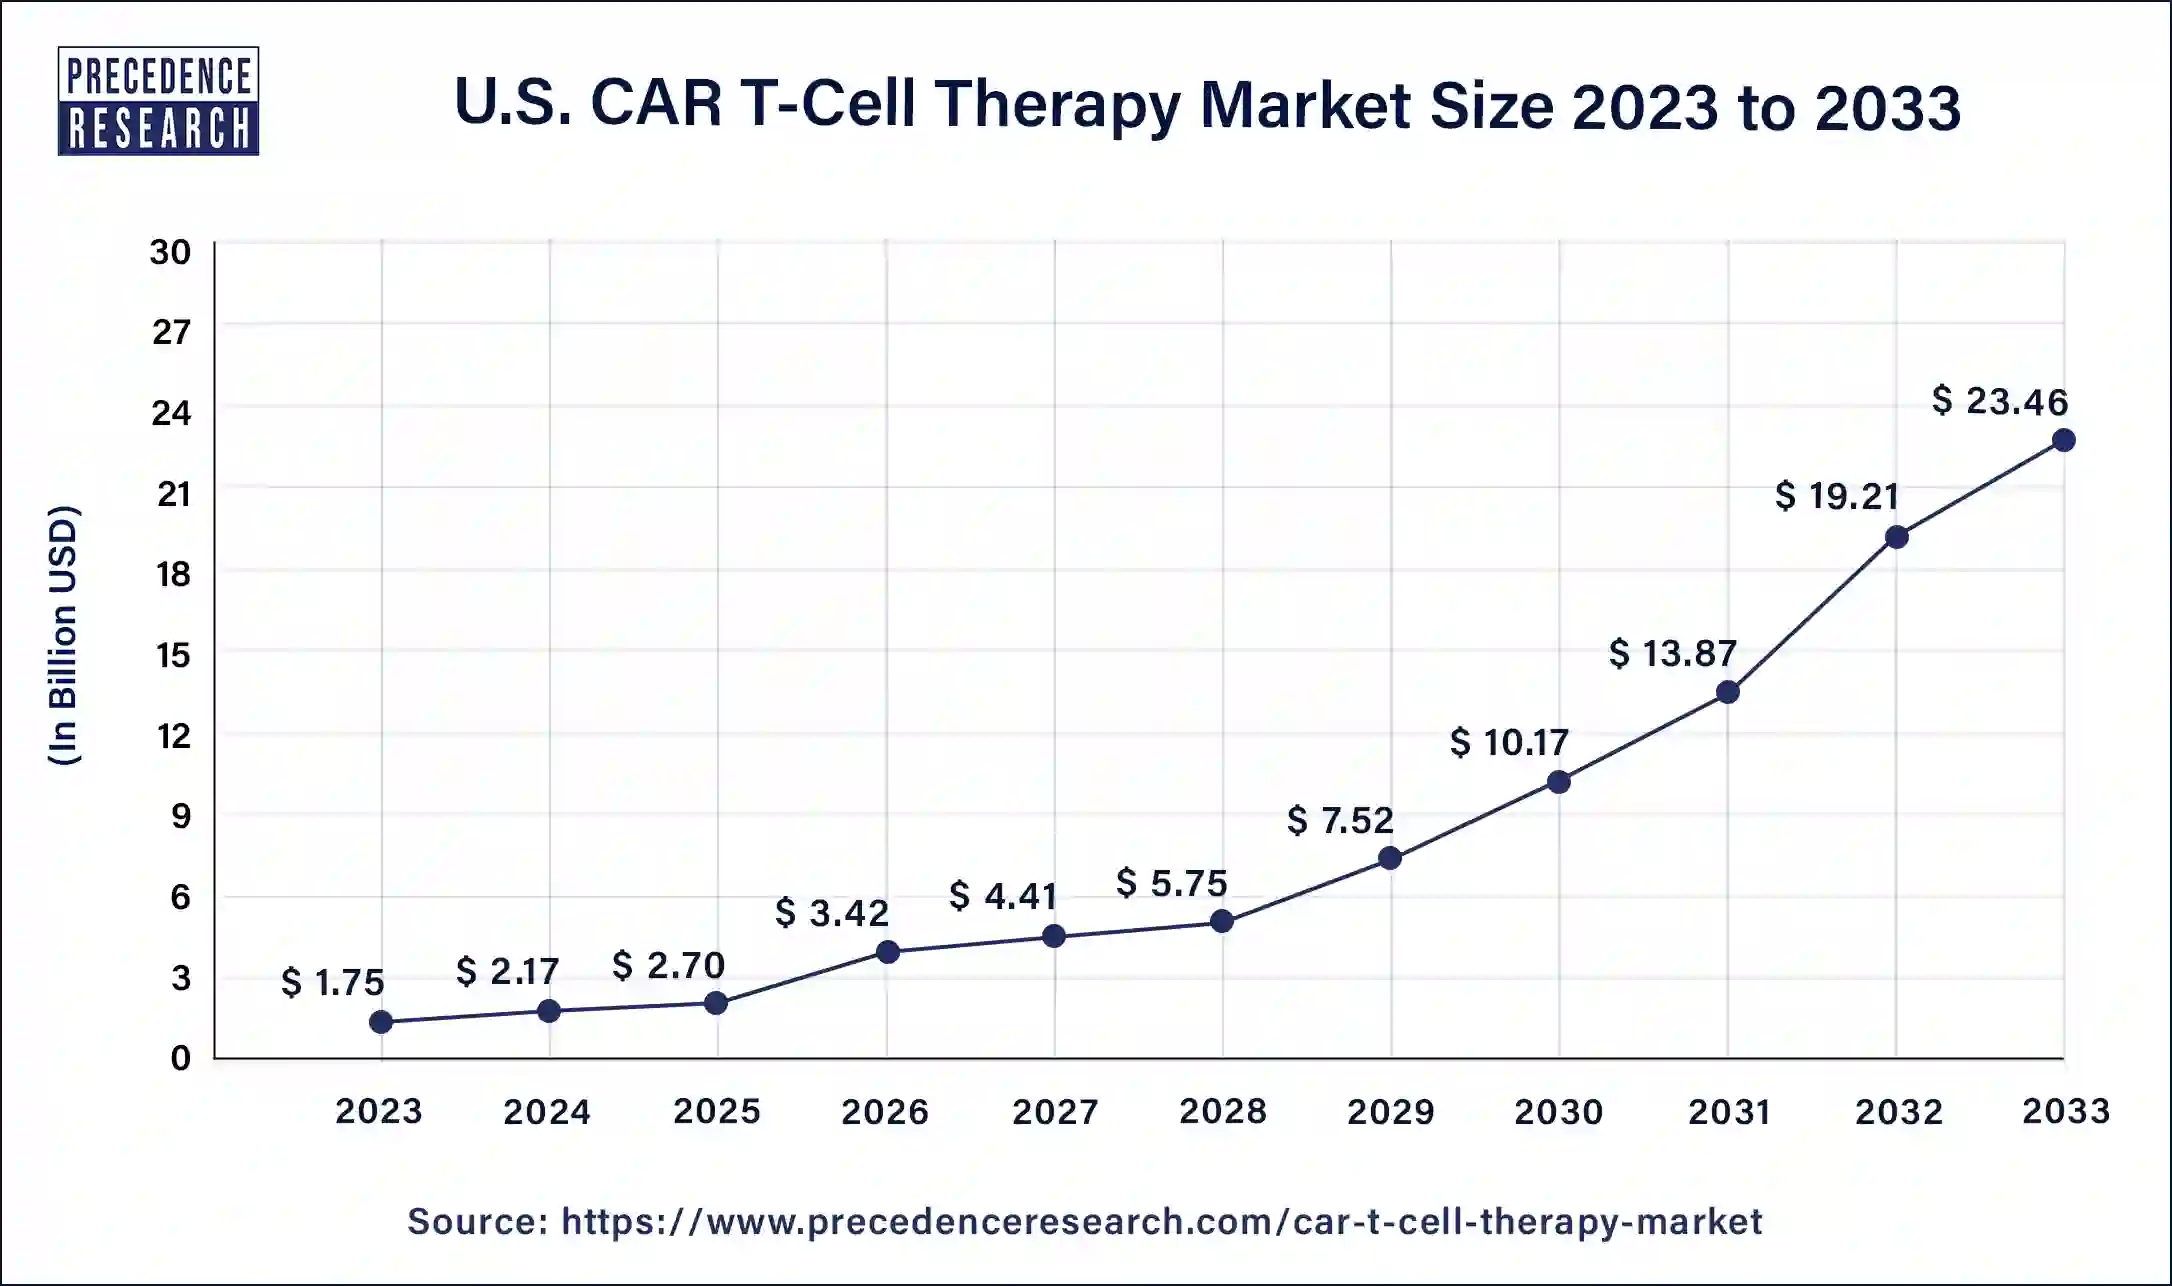 U.S. CAR T-Cell Therapy Market Size 2024 To 2033